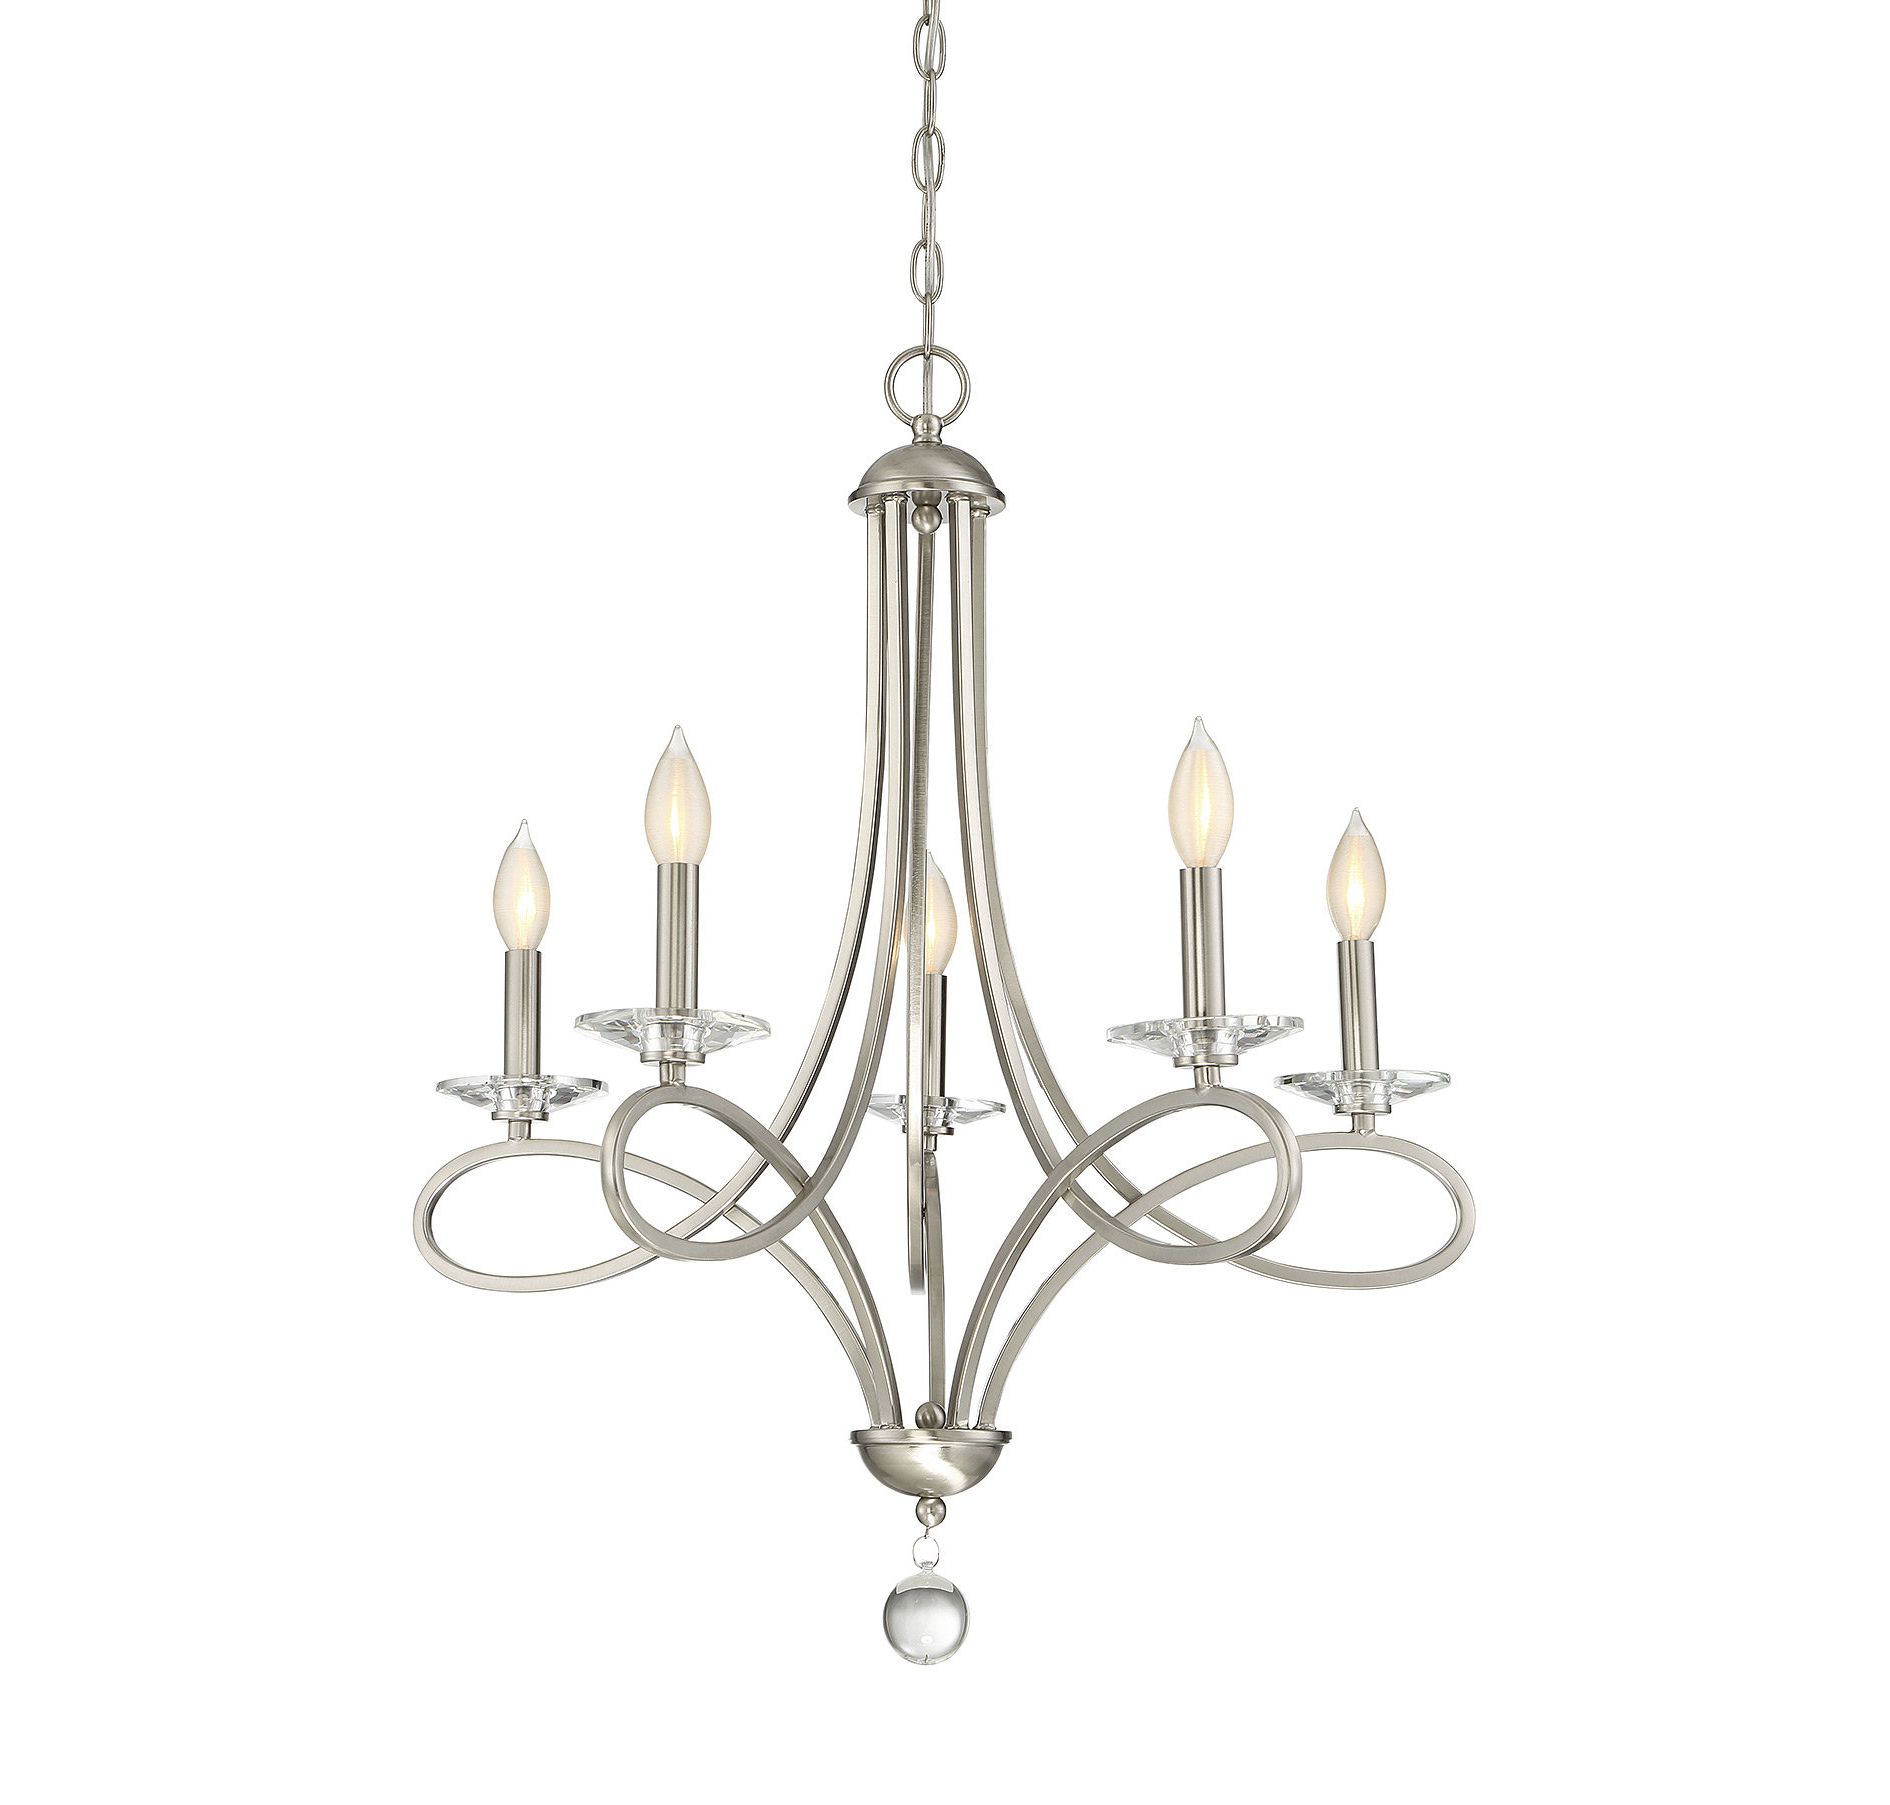 Willa Arlo Interiors Berger 5 Light Candle Style Chandelier Within Well Known Bouchette Traditional 6 Light Candle Style Chandeliers (View 19 of 25)